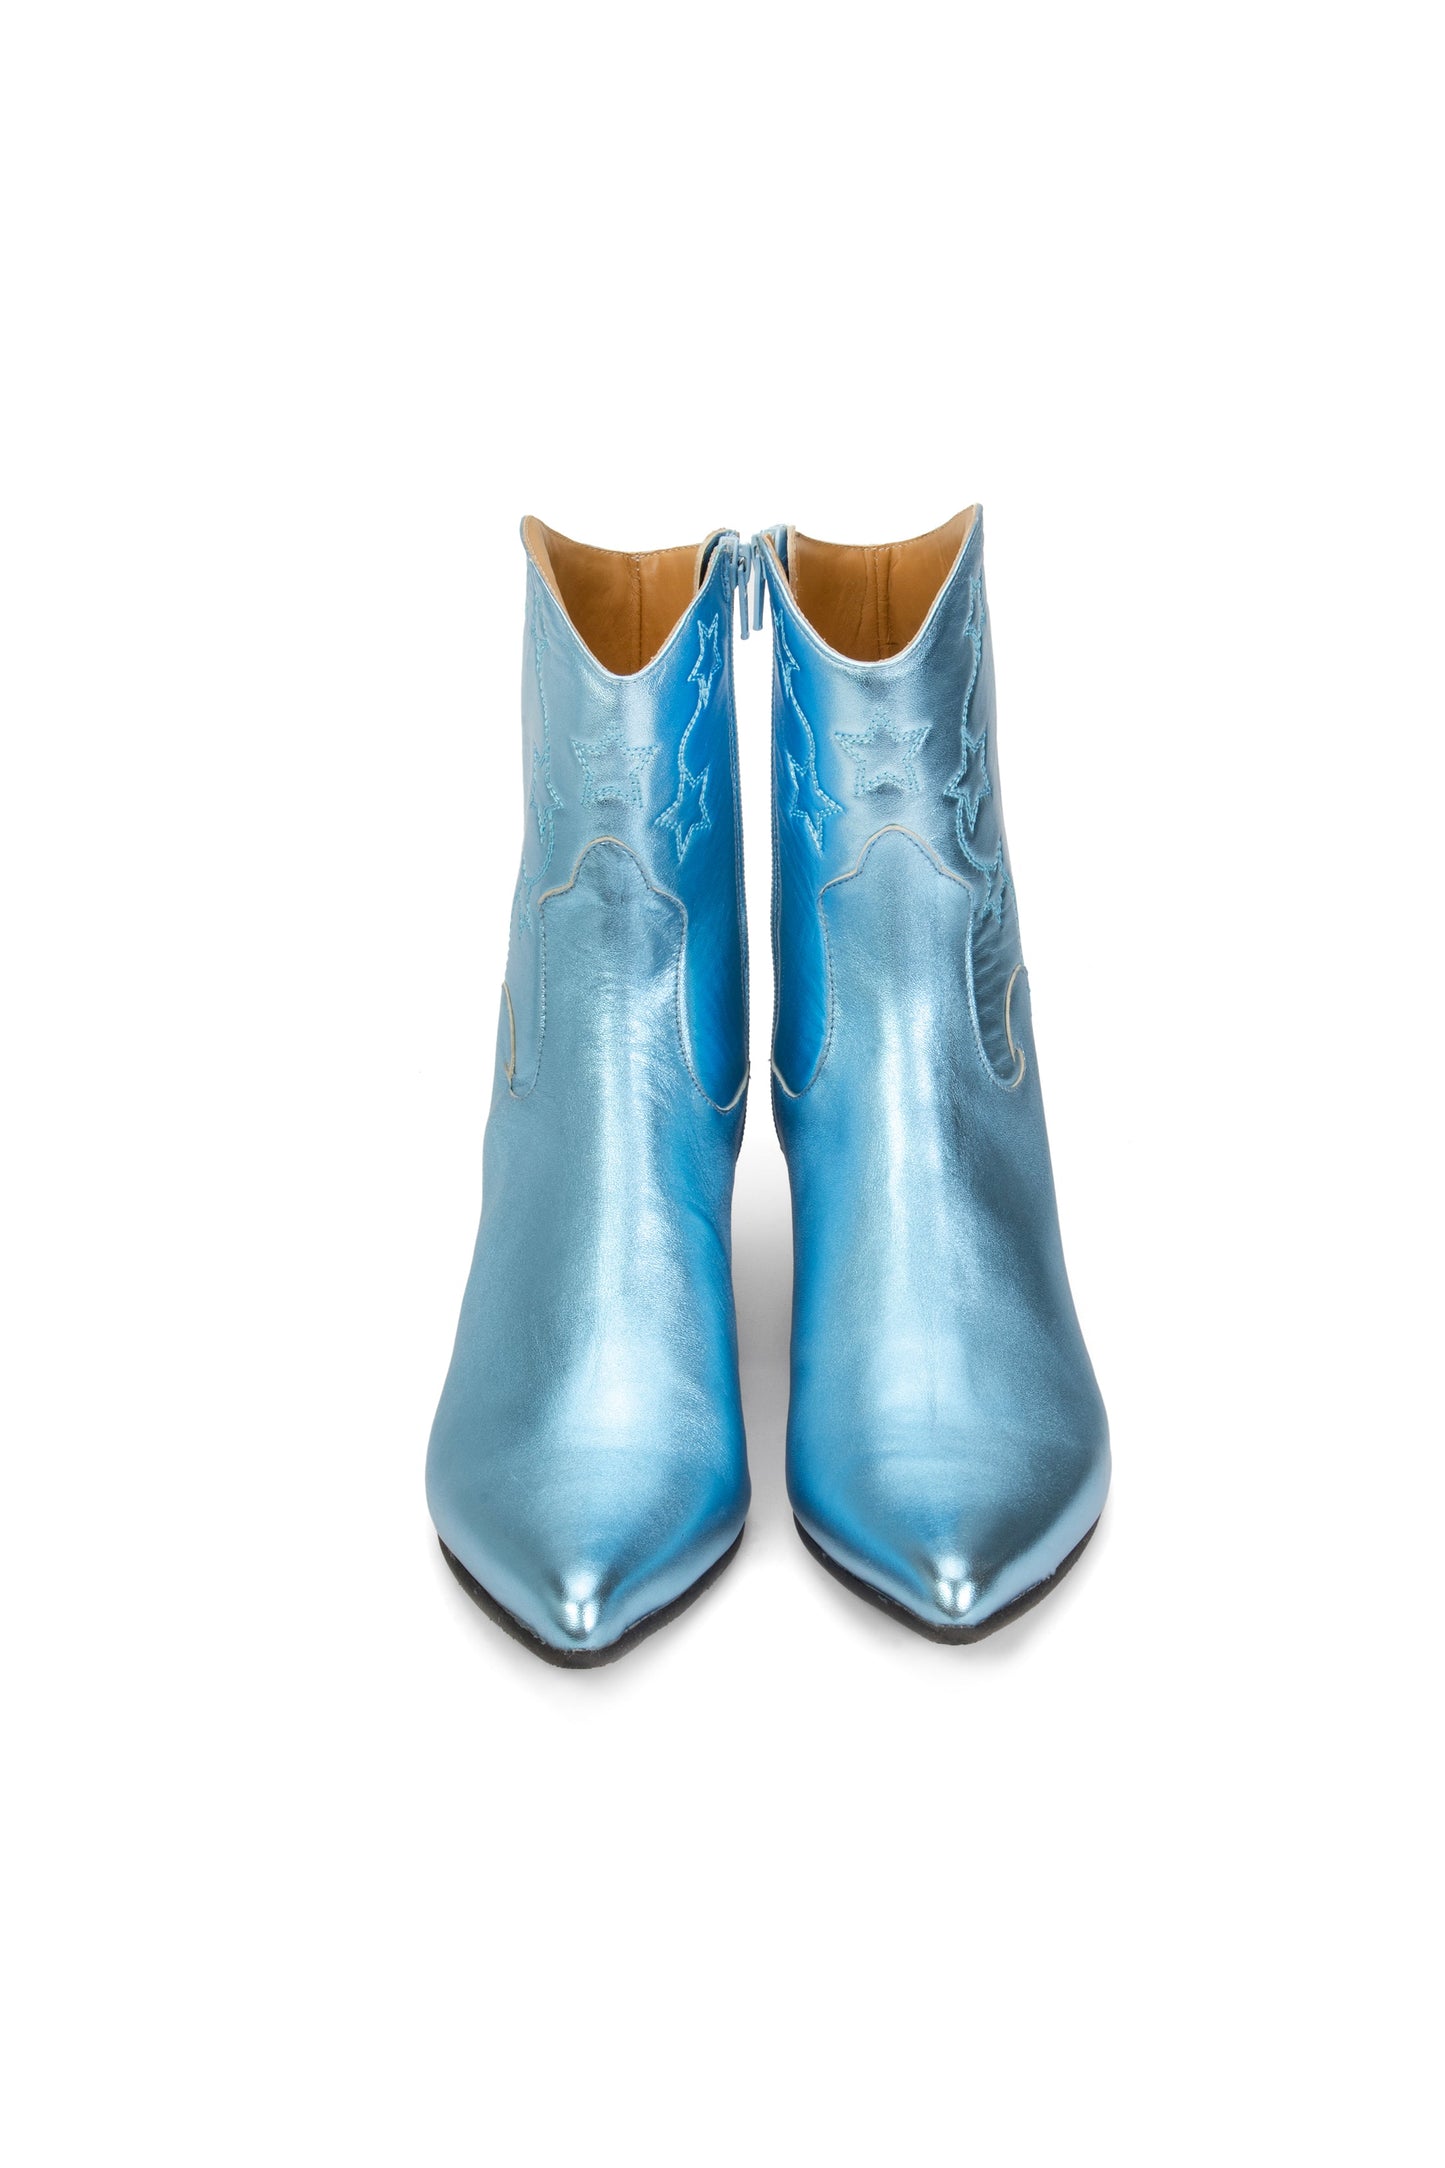 Metallic blue Carefully stitched & crafted boots with the same pattern on the ankles and front part